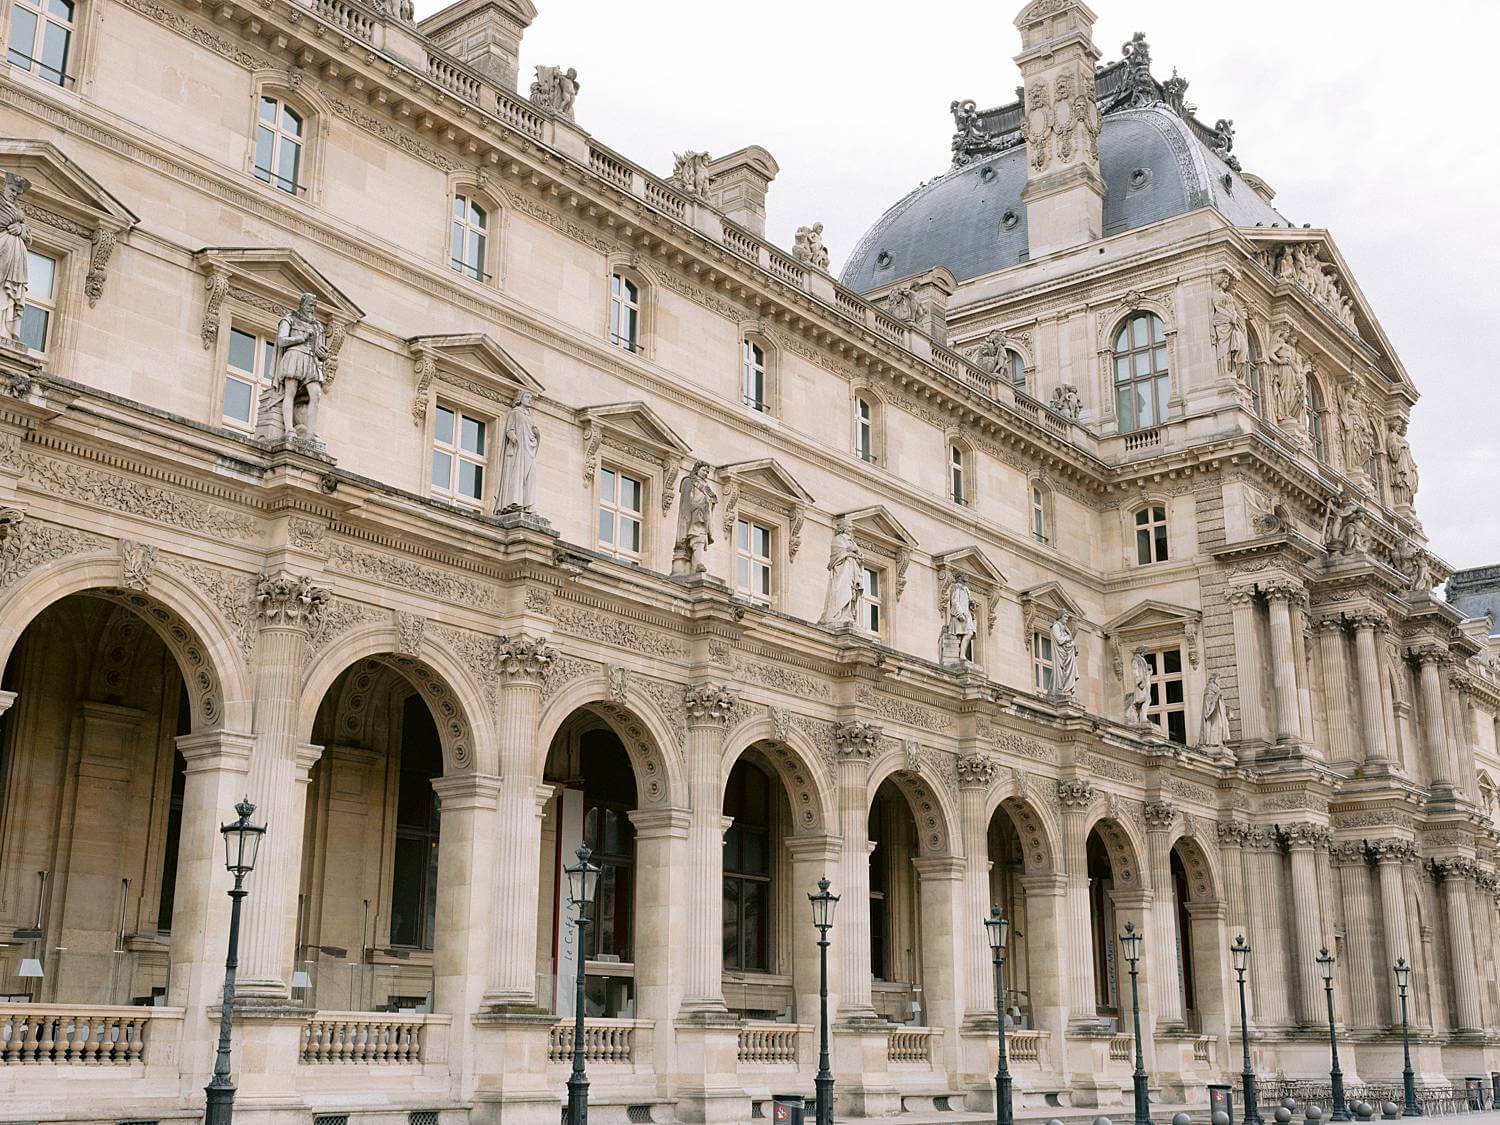 Exterior of the Louvre Museum